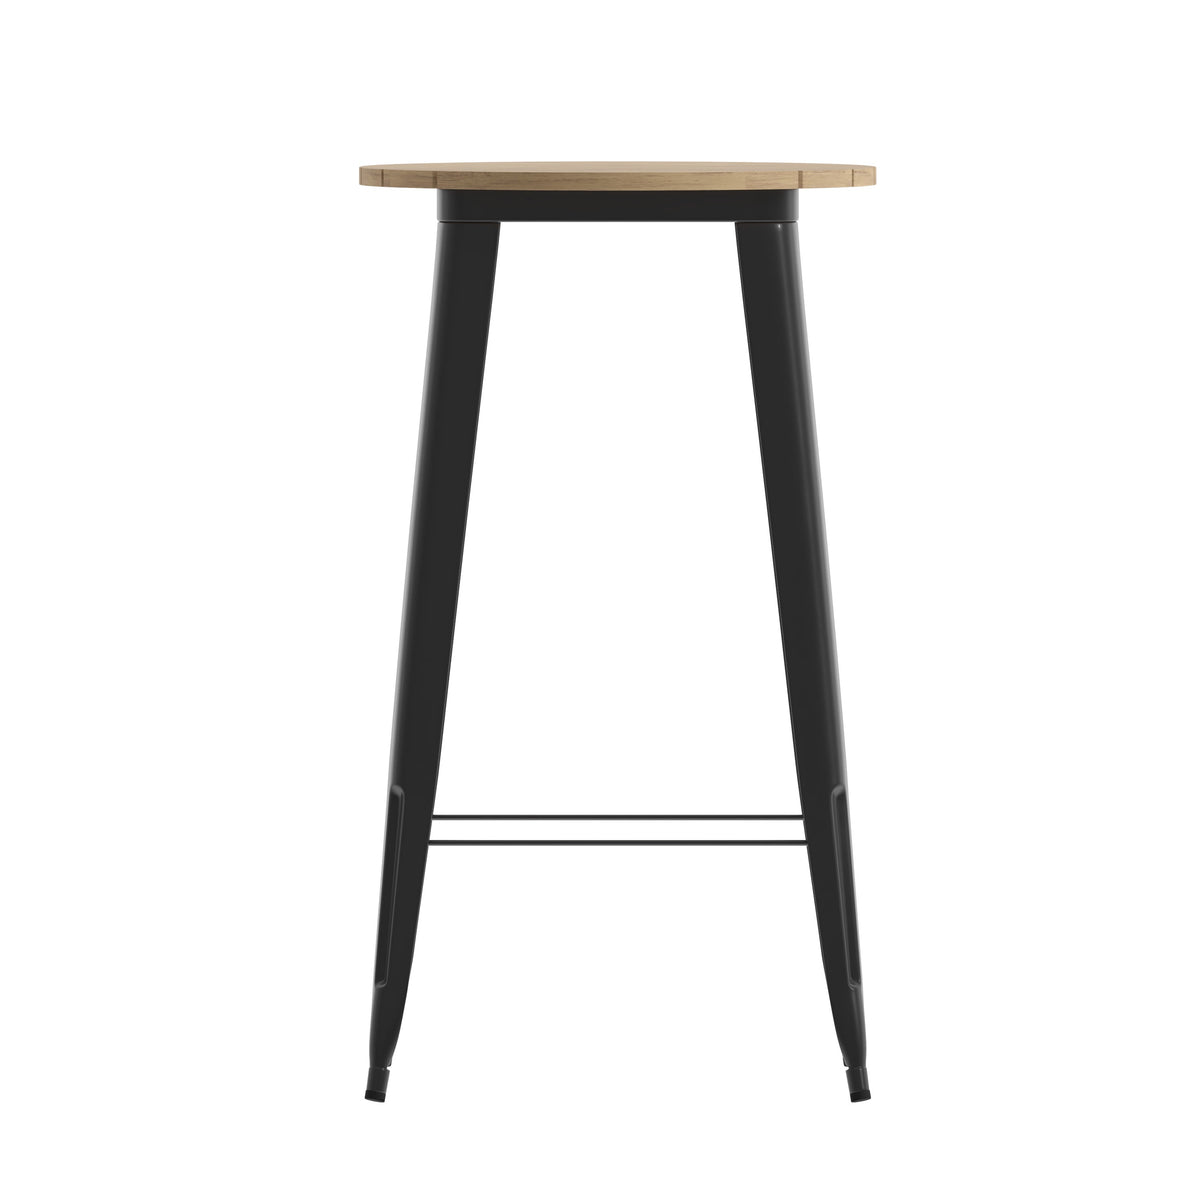 Brown/Black |#| 23.75inch RD Commercial Poly Bar Top Restaurant Table with Steel Frame-Brown/Black